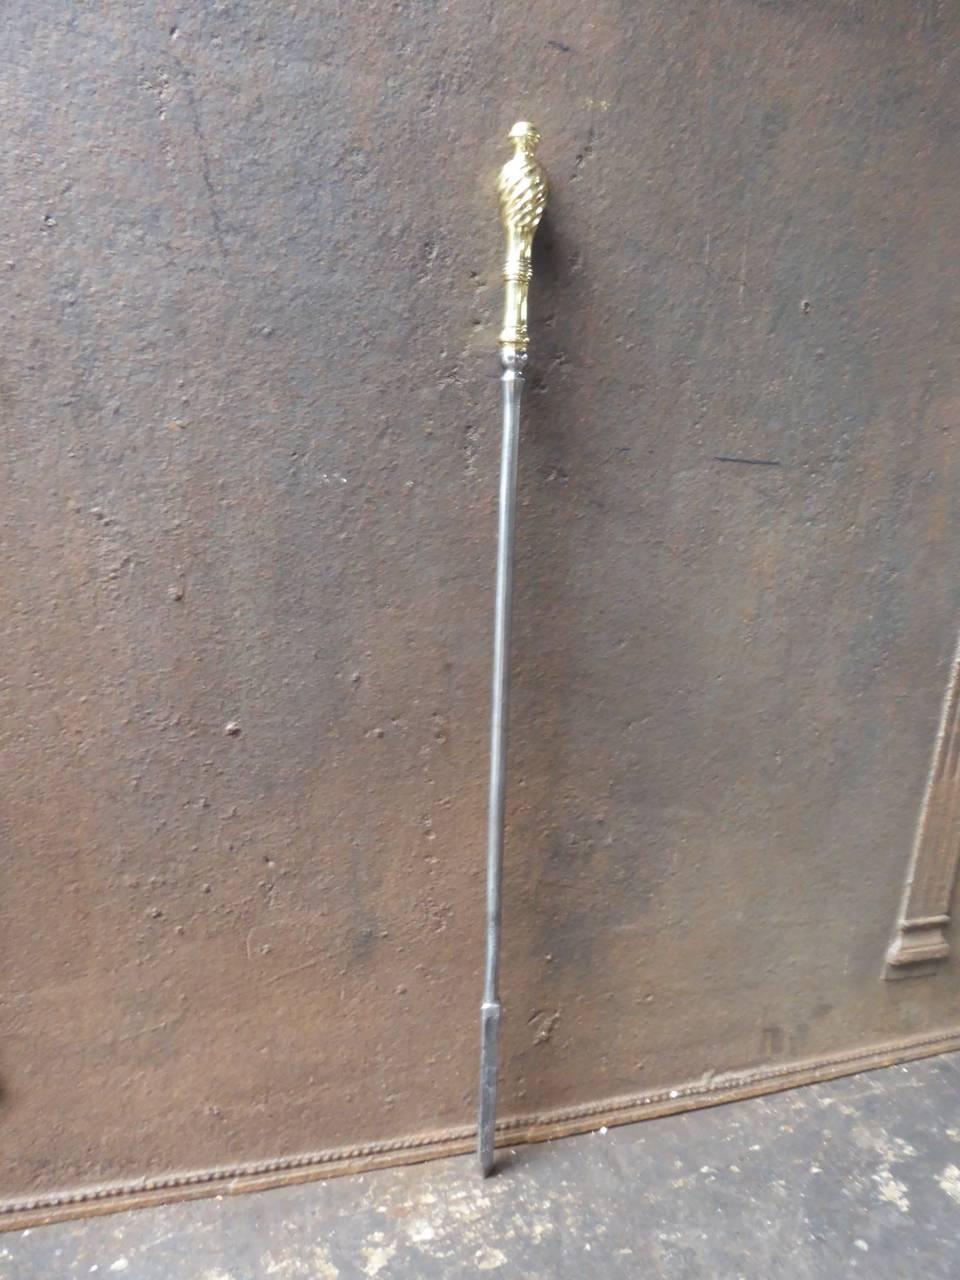 19th century English firepoker made of polished steel and polished brass.